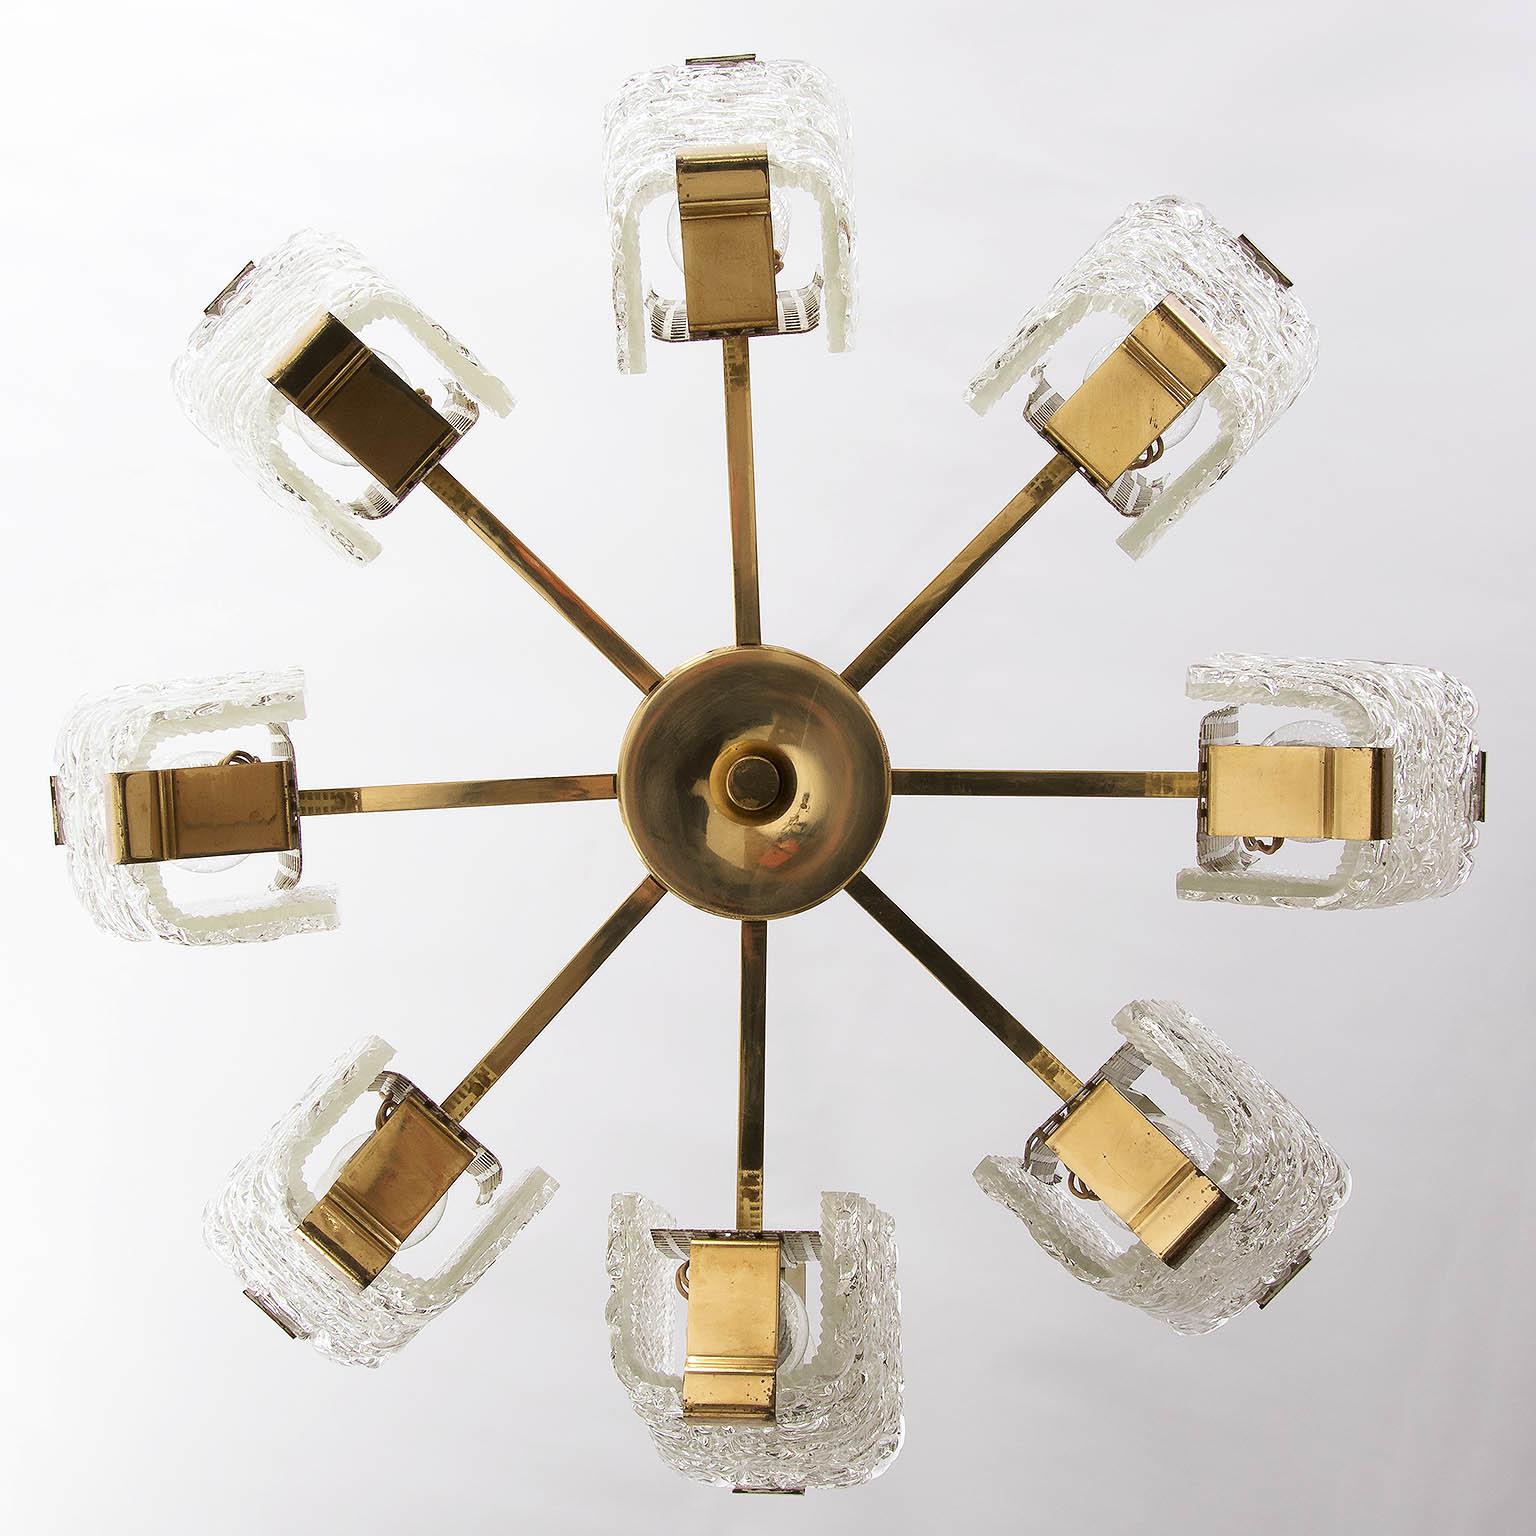 An impressive handmade and large chandeliers by J.T. Kalmar, Austria, manufactured in midcentury, circa 1960 (late 1950s or early 1960s).
The fixture is made of polished brass in a warm tone, textured cast glass and perforated white paint metal. 
It